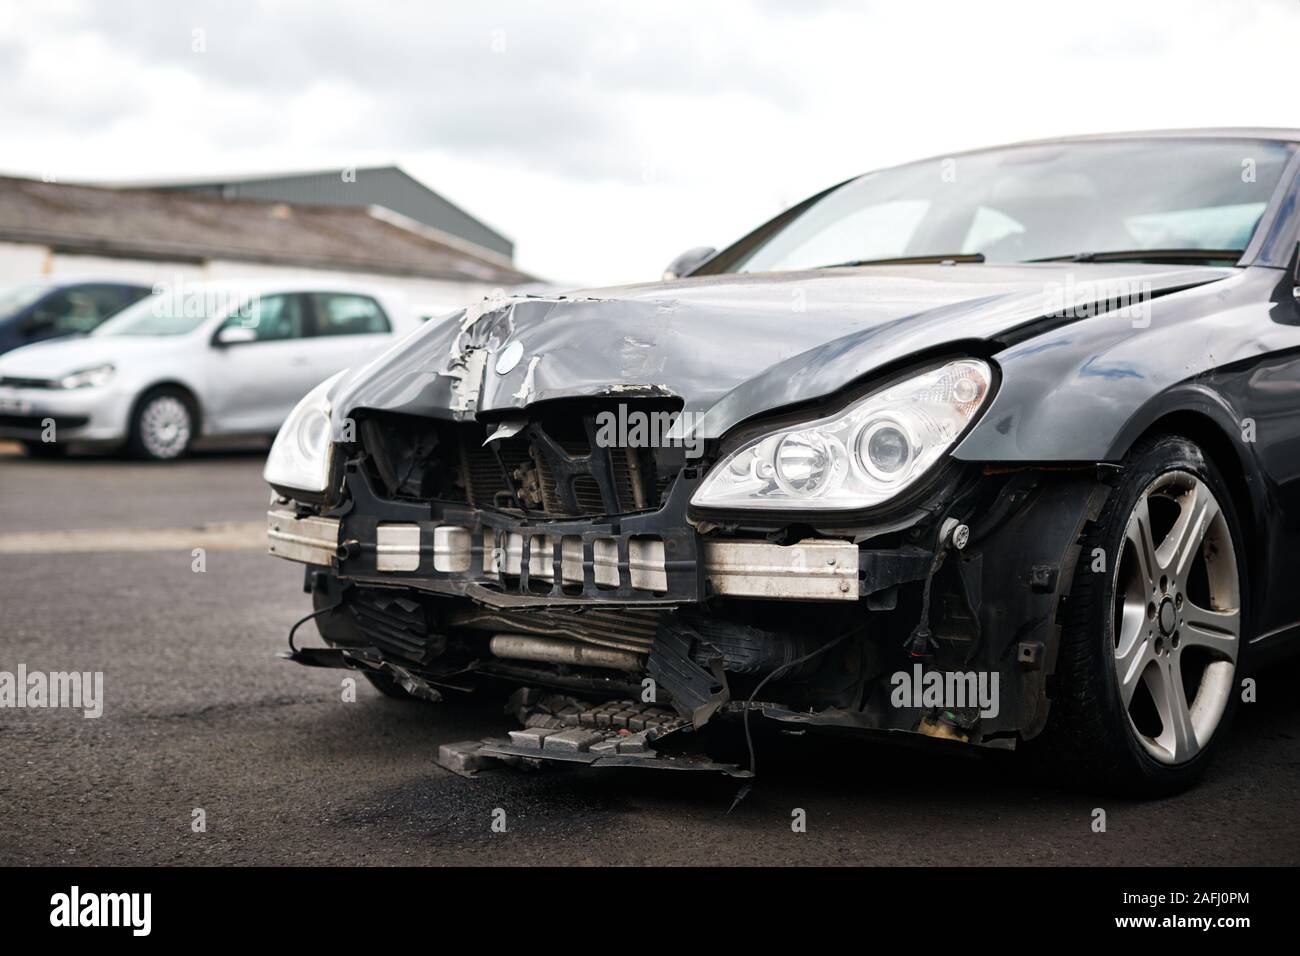 Detail Of Car Damaged In Motor Vehicle Accident Parked In Garage Repair Shop Stock Photo